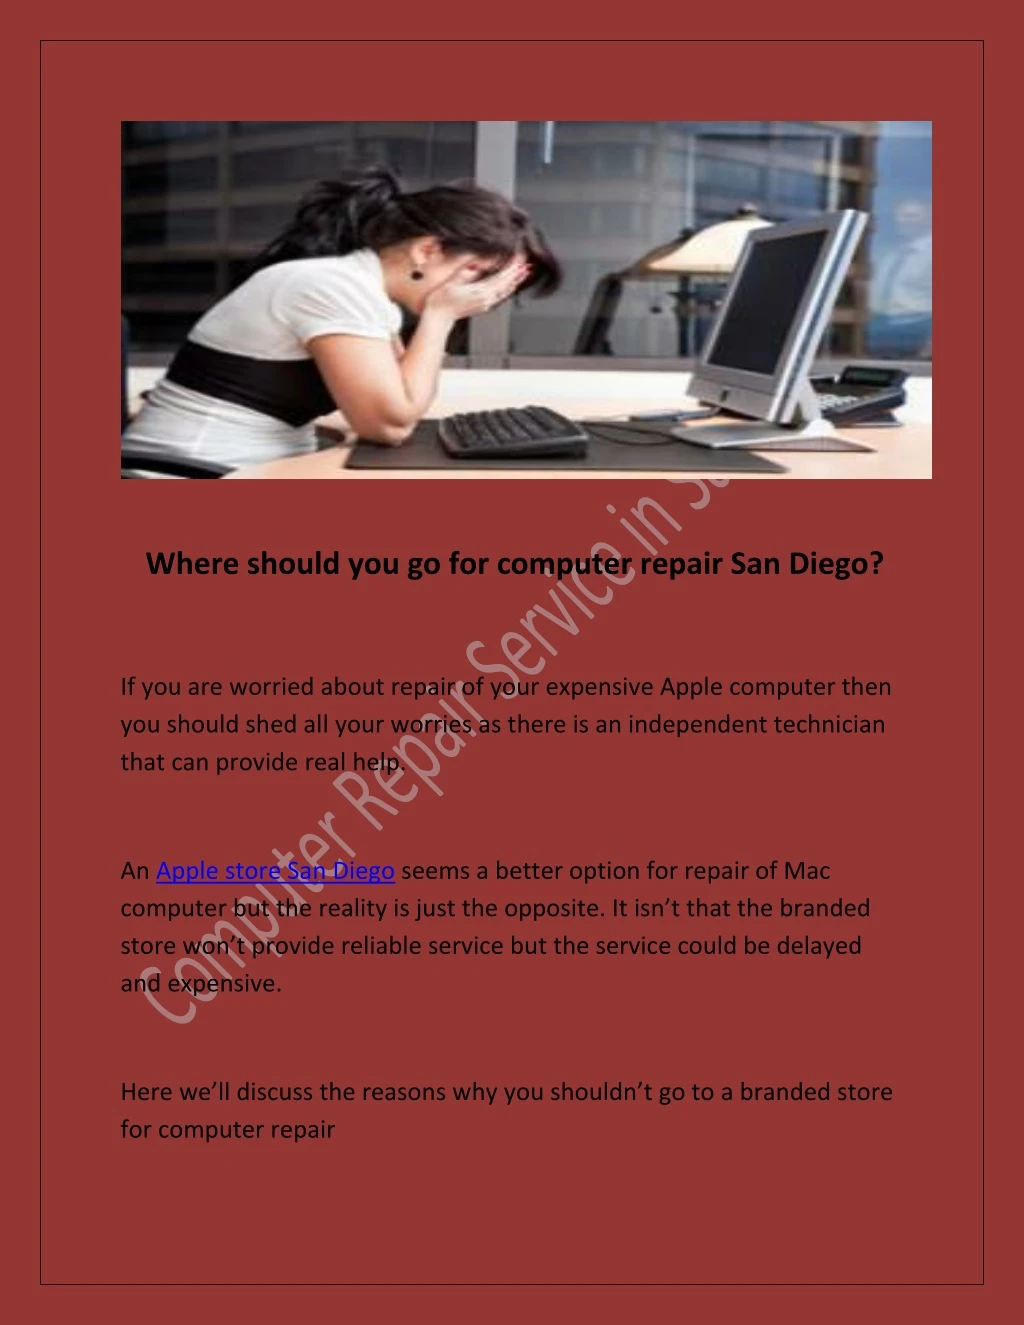 where should you go for computer repair san diego